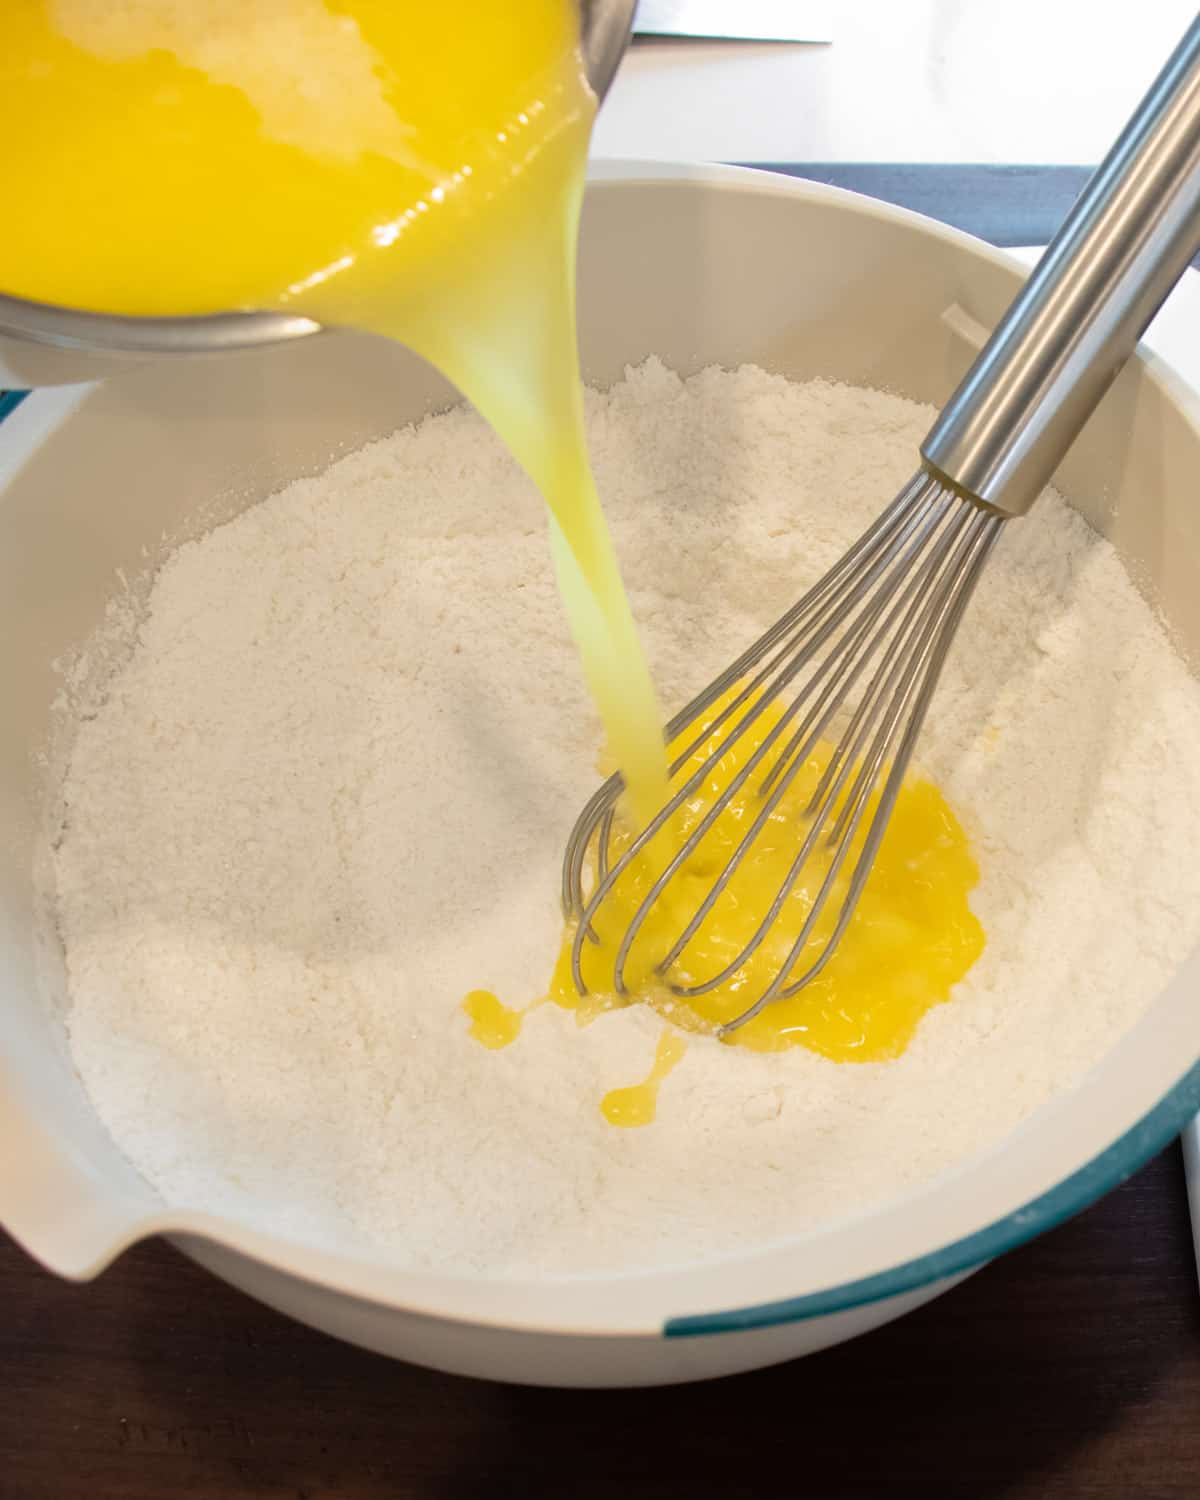 Melted butter being poured into a mixing bowl filled with flour.